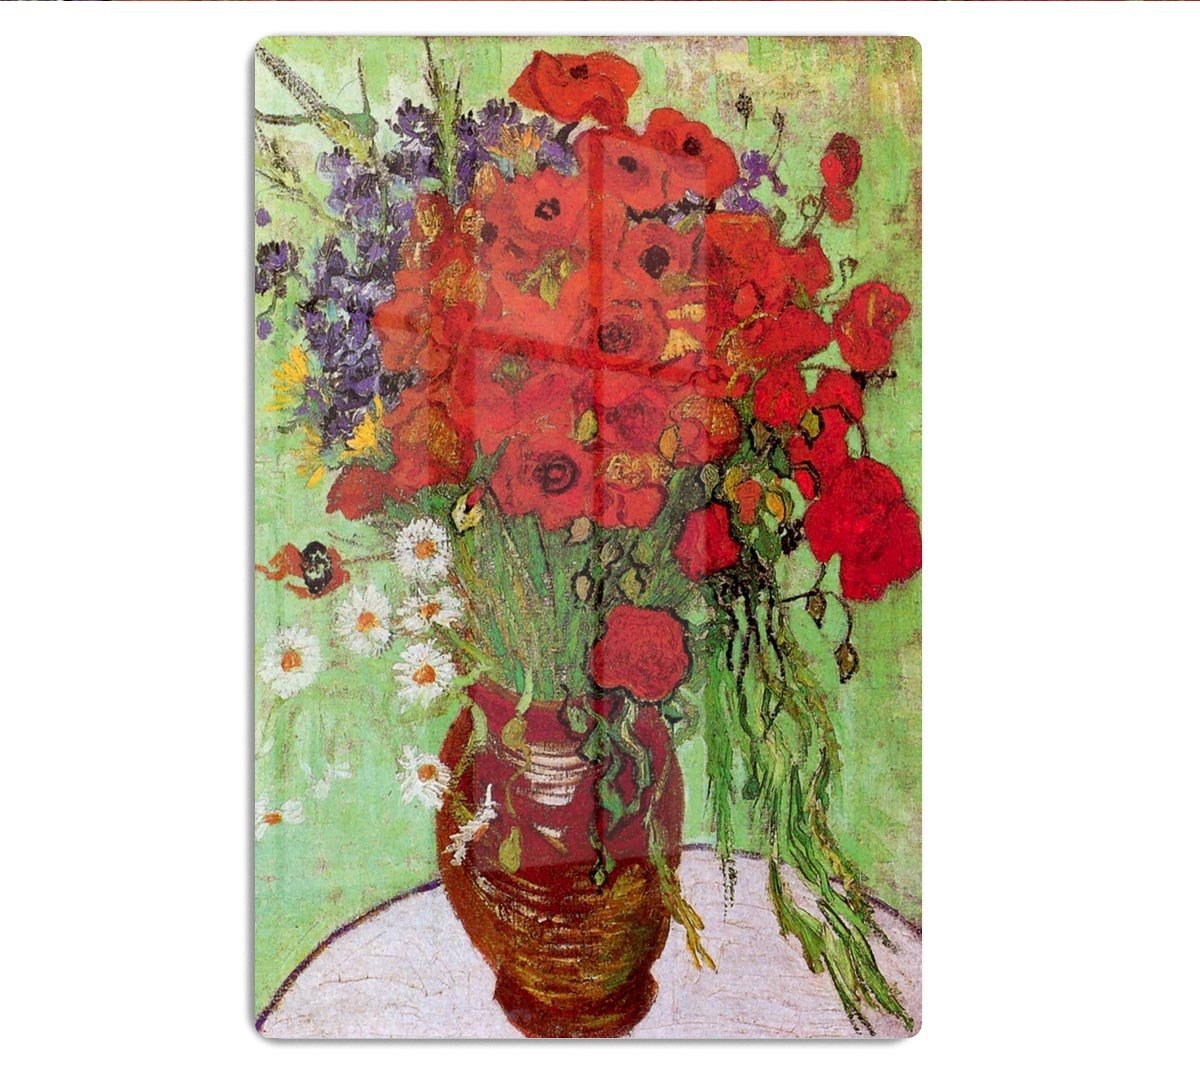 Still Life Red Poppies and Daisies by Van Gogh HD Metal Print